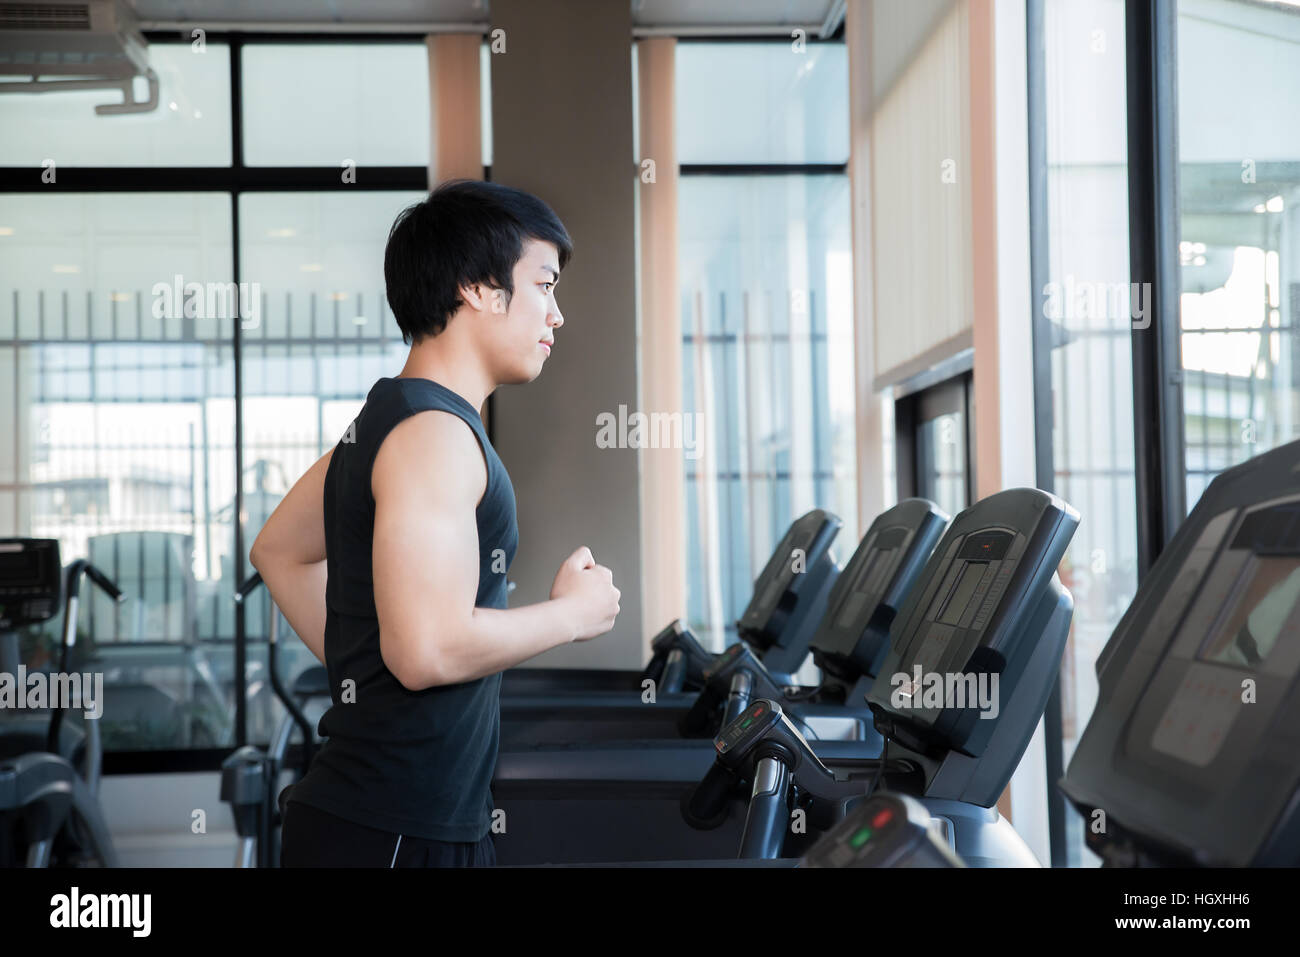 Asian young man running on treadmill in gym. Health and sport concept. Stock Photo